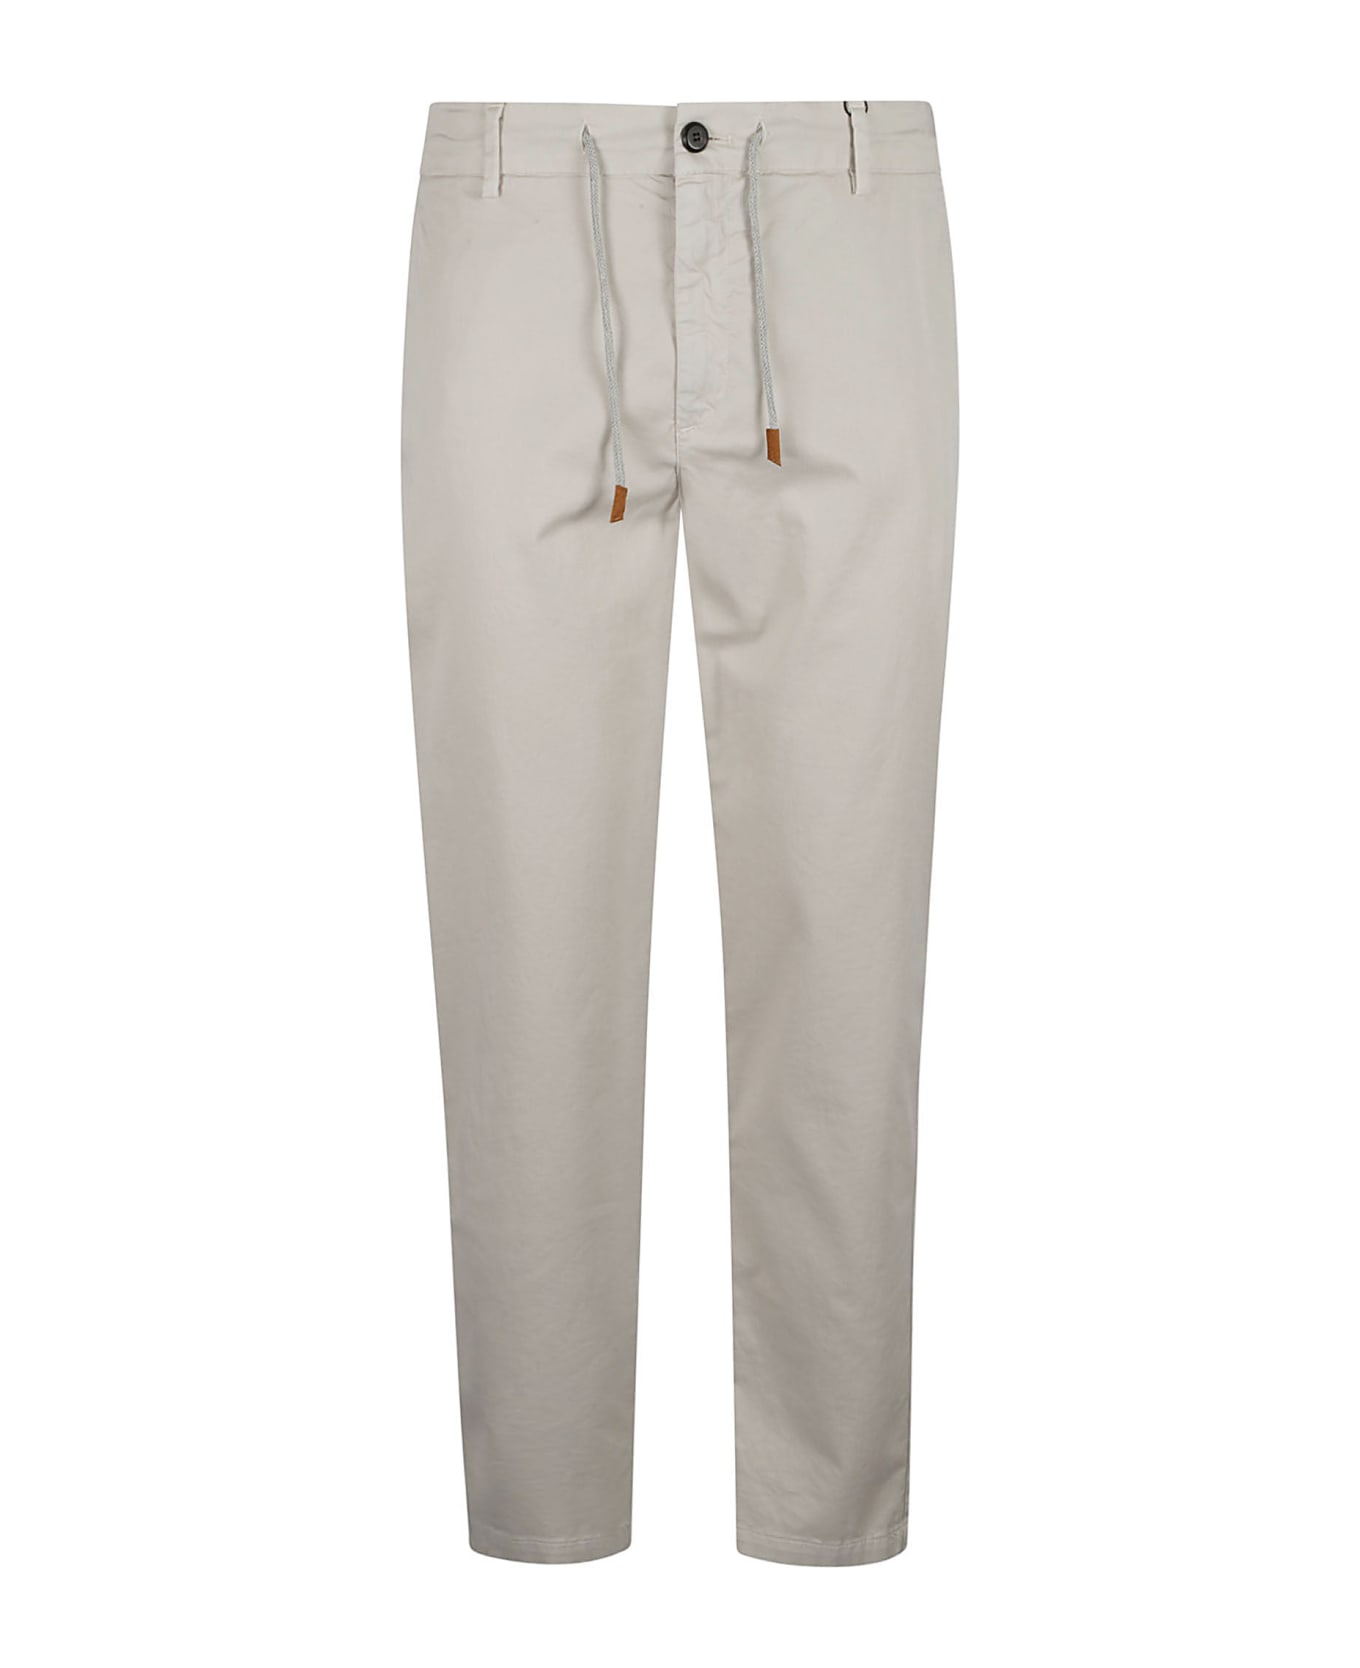 Eleventy Drawstringed Buttoned Trousers - Sand